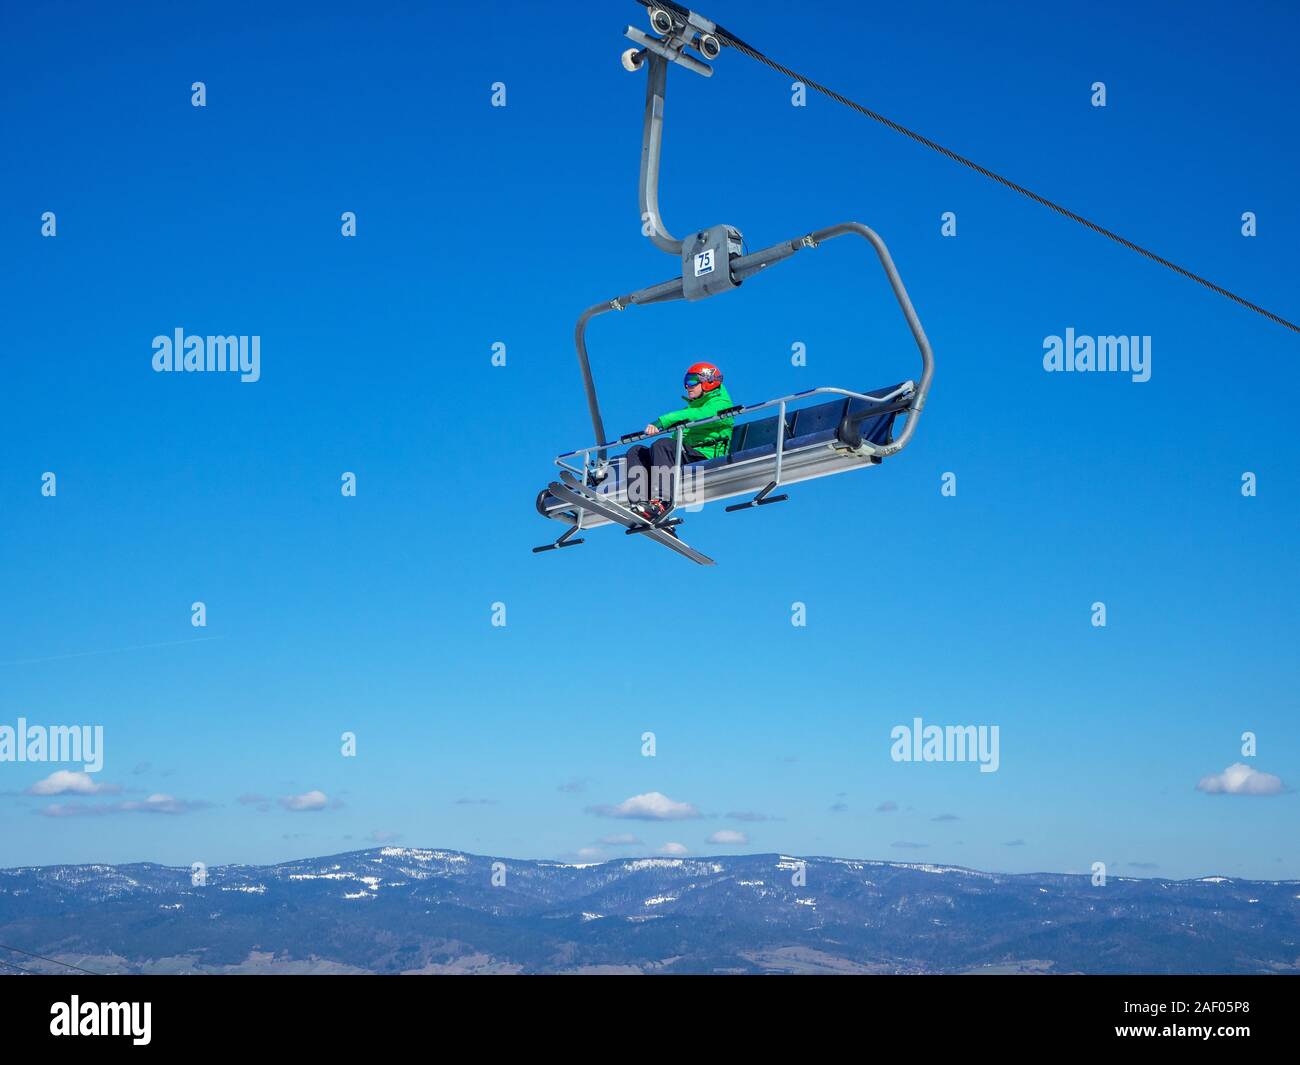 Bialka Tatrzanska, Poland - March 27, 2018: A Chairlift for skiers and snowboarders with a skier in a green ski jacket, red helmet and goggles on blue Stock Photo